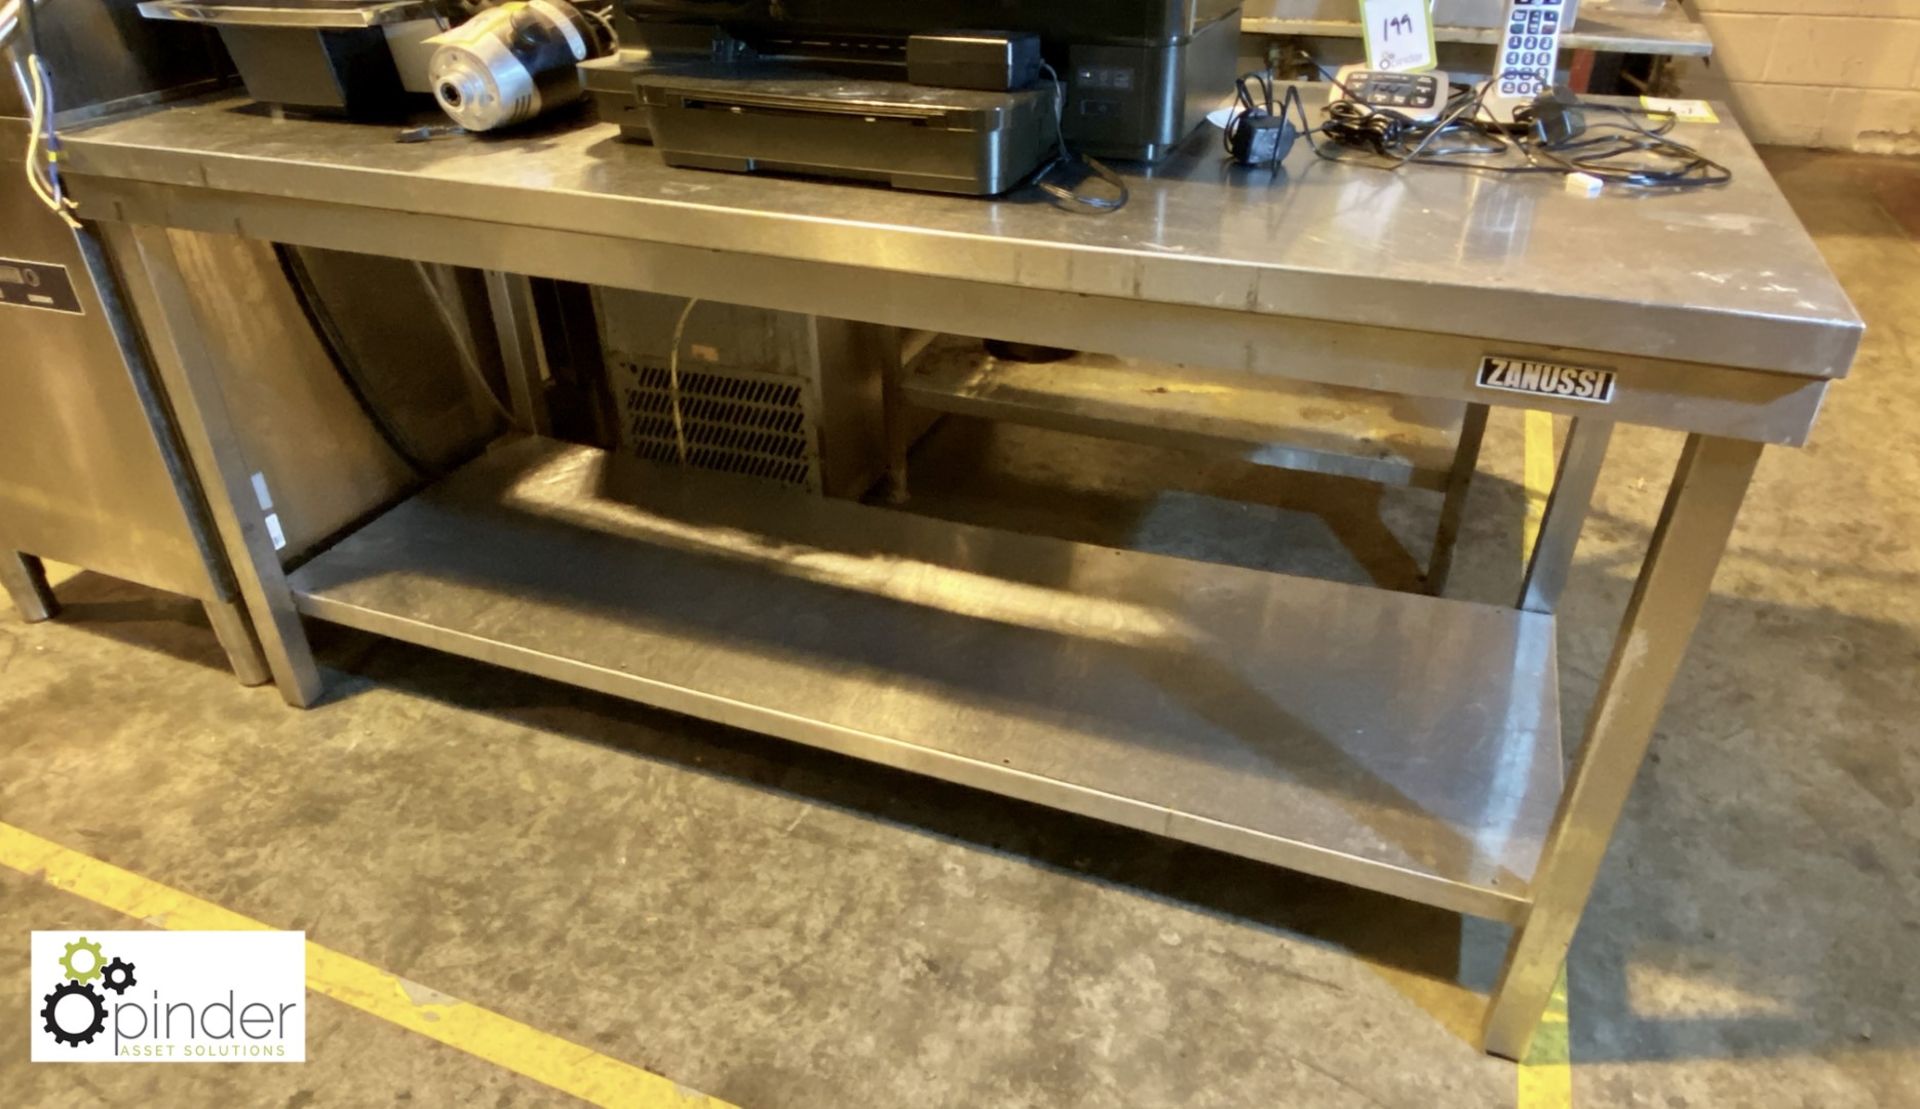 Stainless steel Preparation Table, 1750mm x 700mm, with undershelf